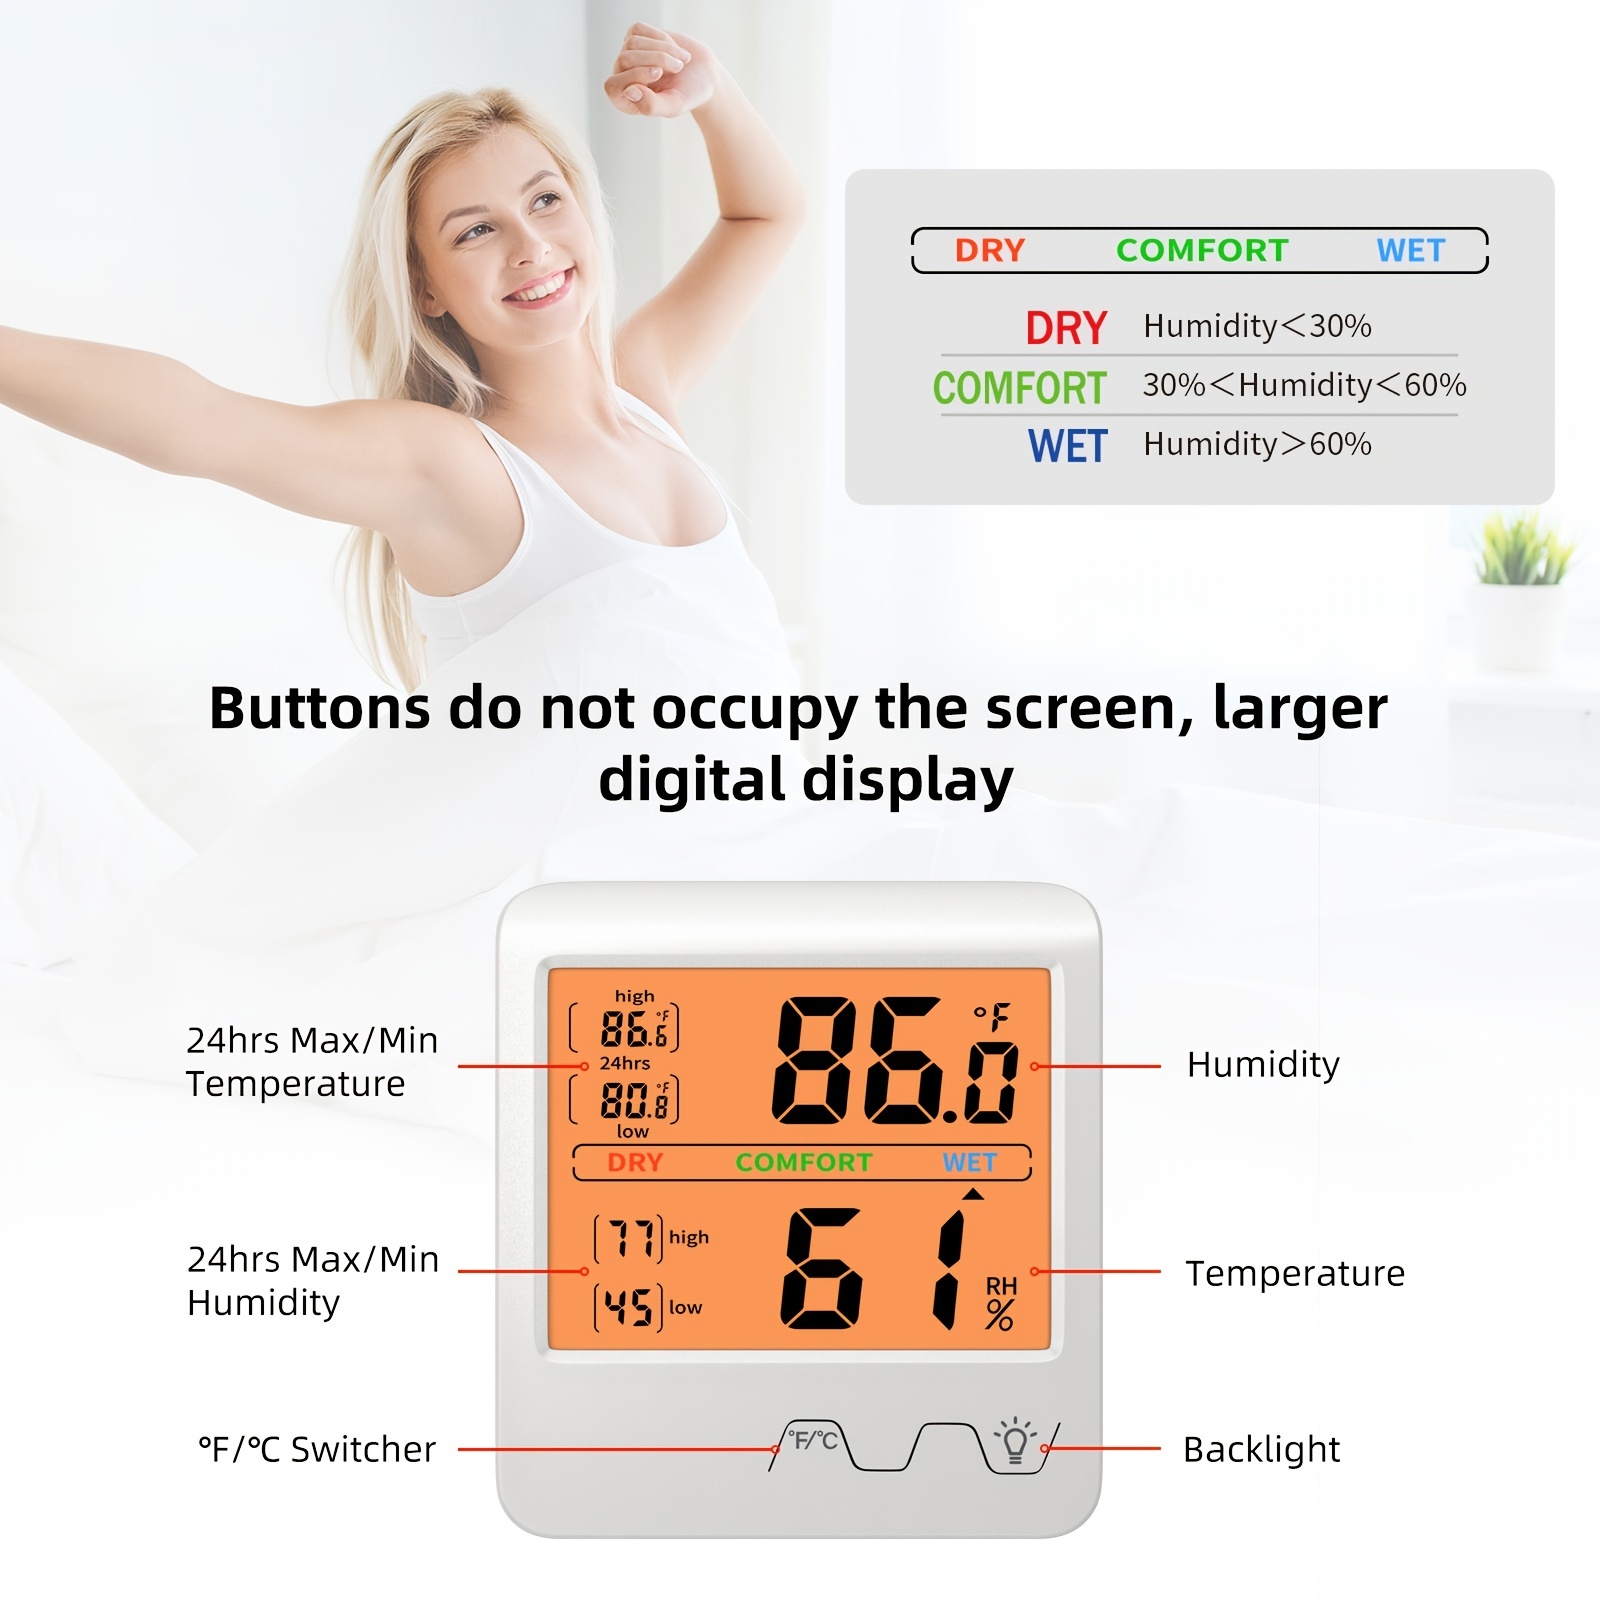 Digital Thermo-Hygrometer Indoor Thermometer Room Thermometer